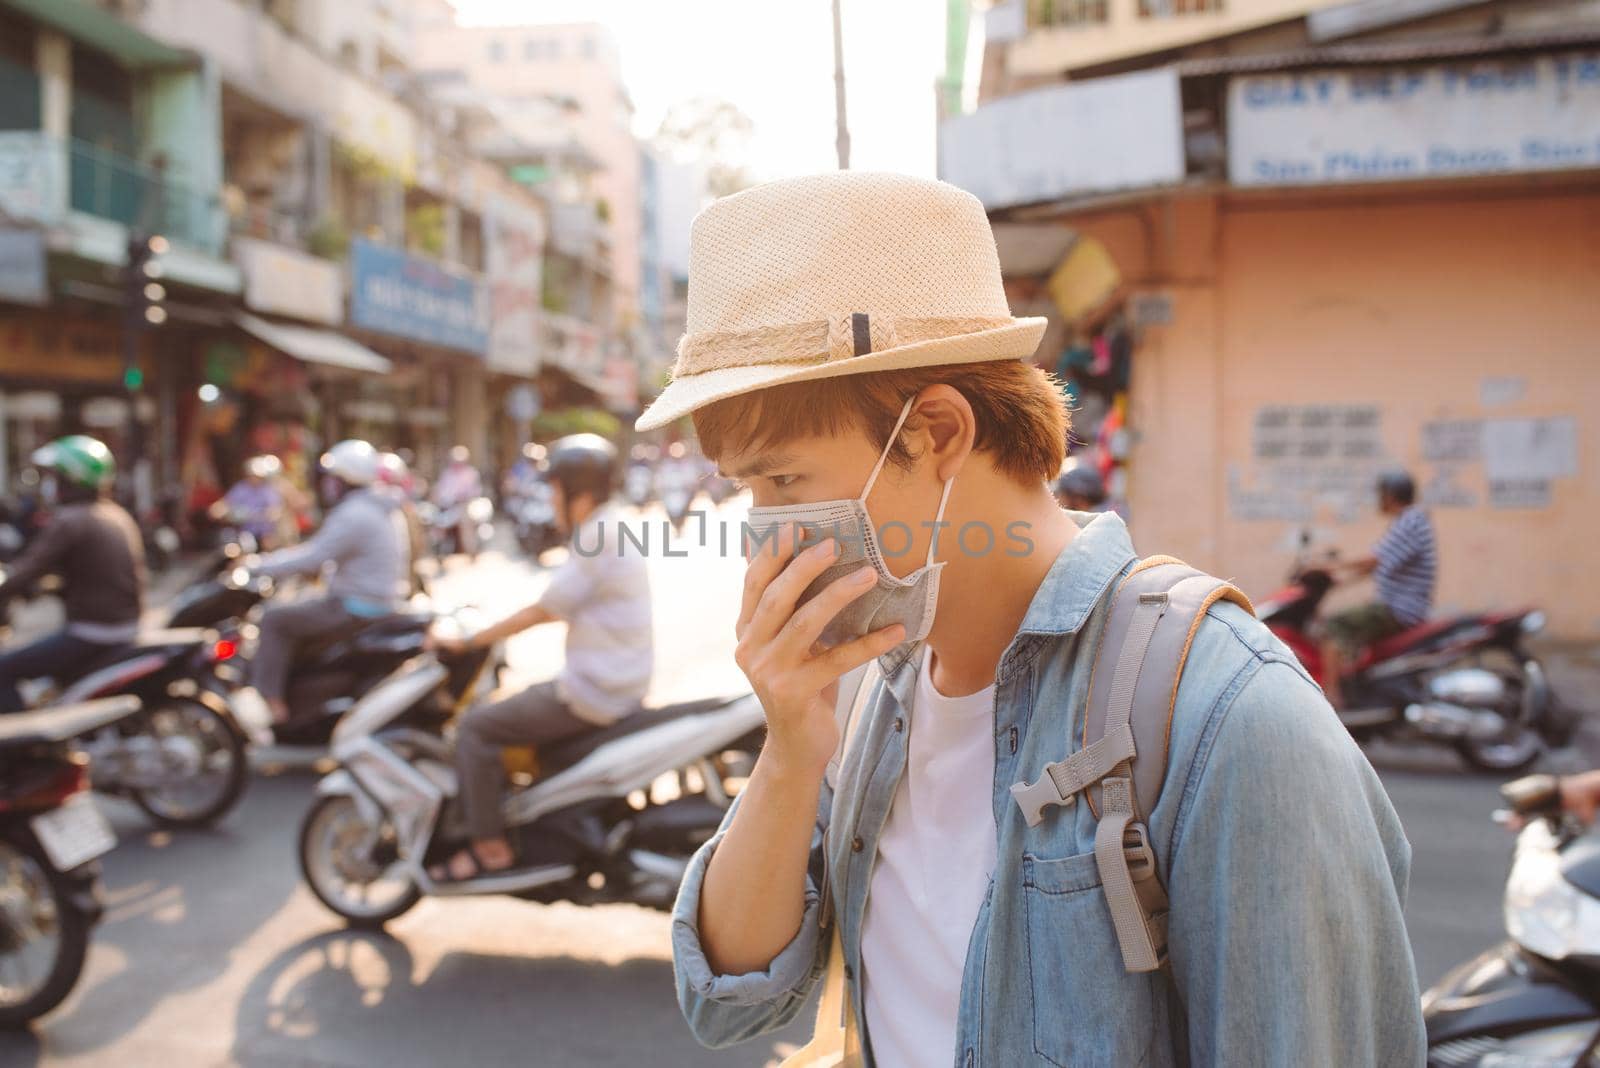 Vietnamese wearing face masks due to the pollution situation in Ho Chi Minh city by makidotvn